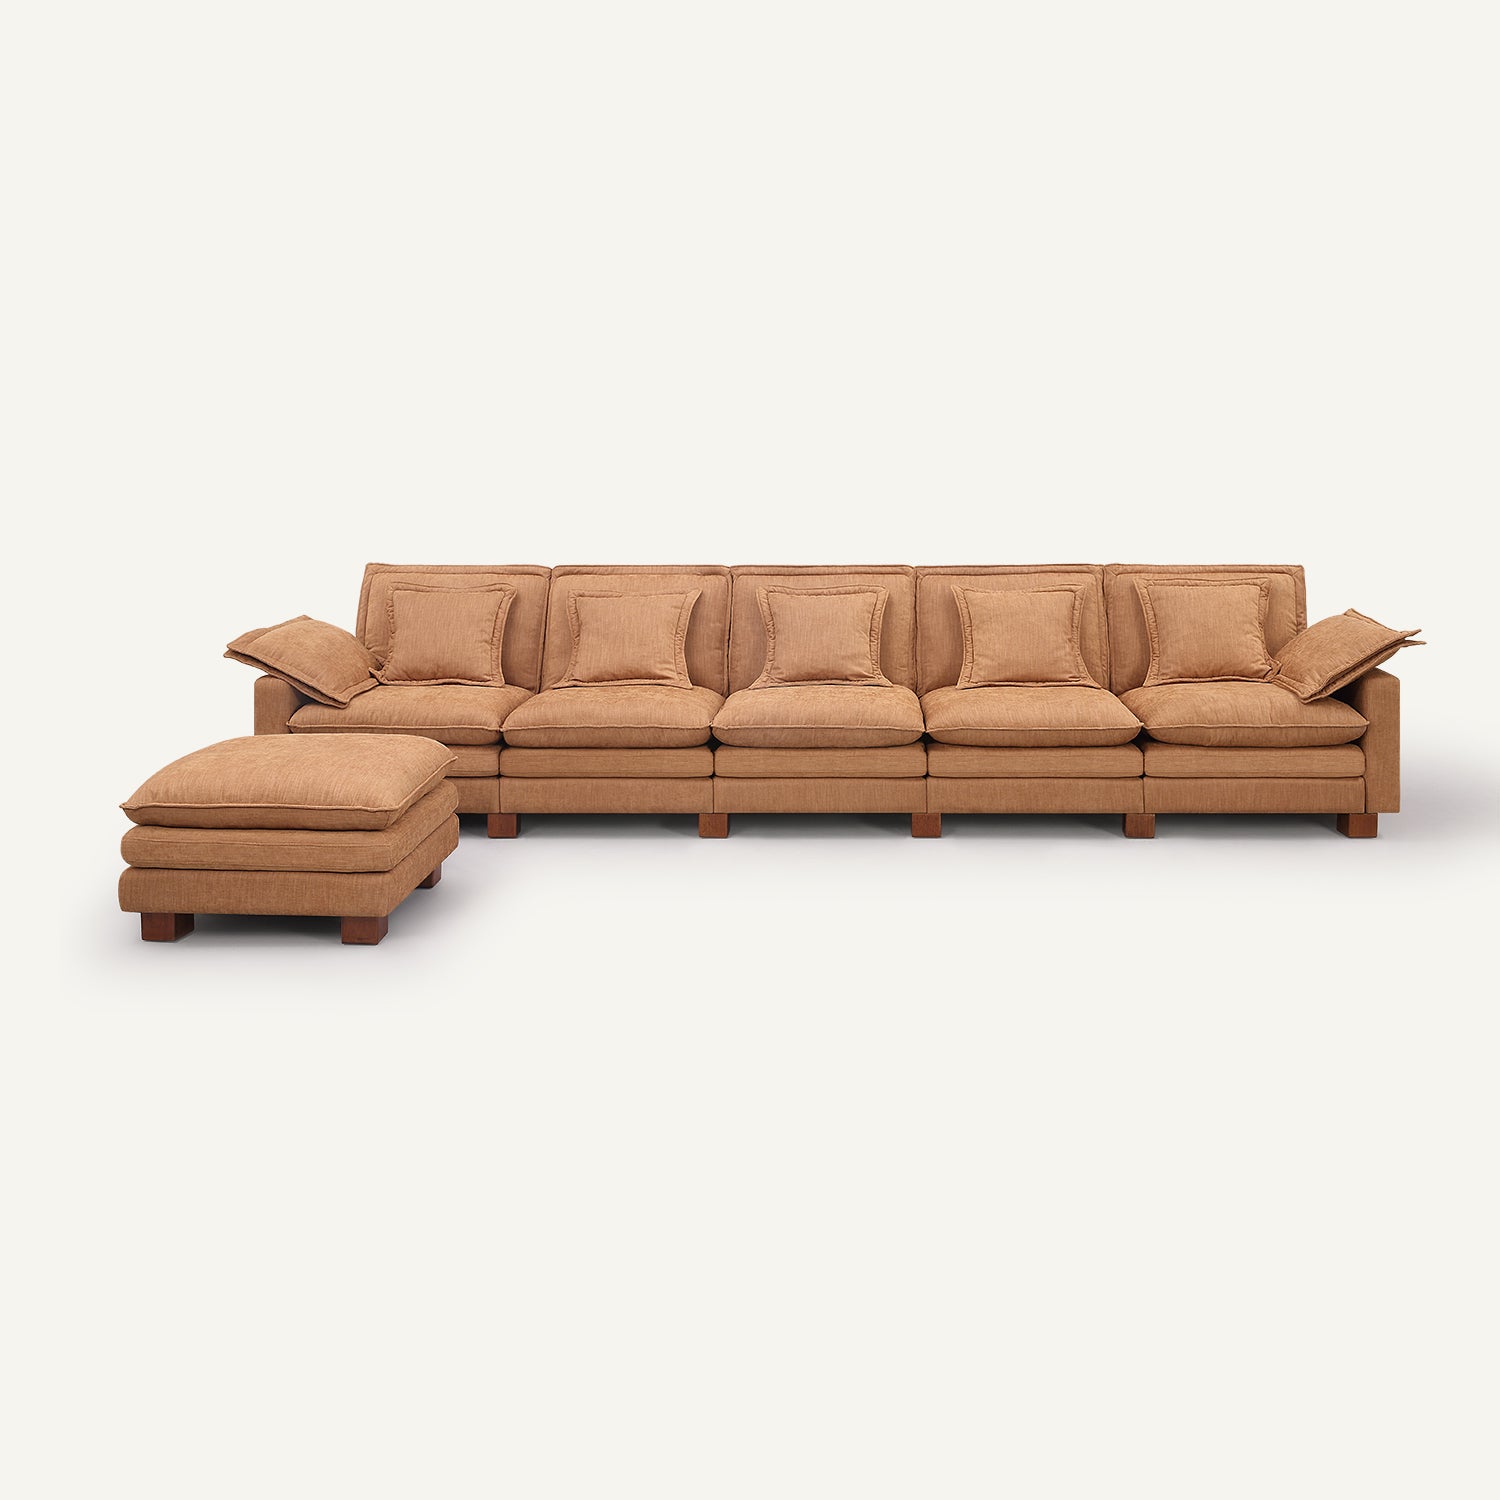 Stacked Tan Linen 5-Seat Sofa with Ottoman